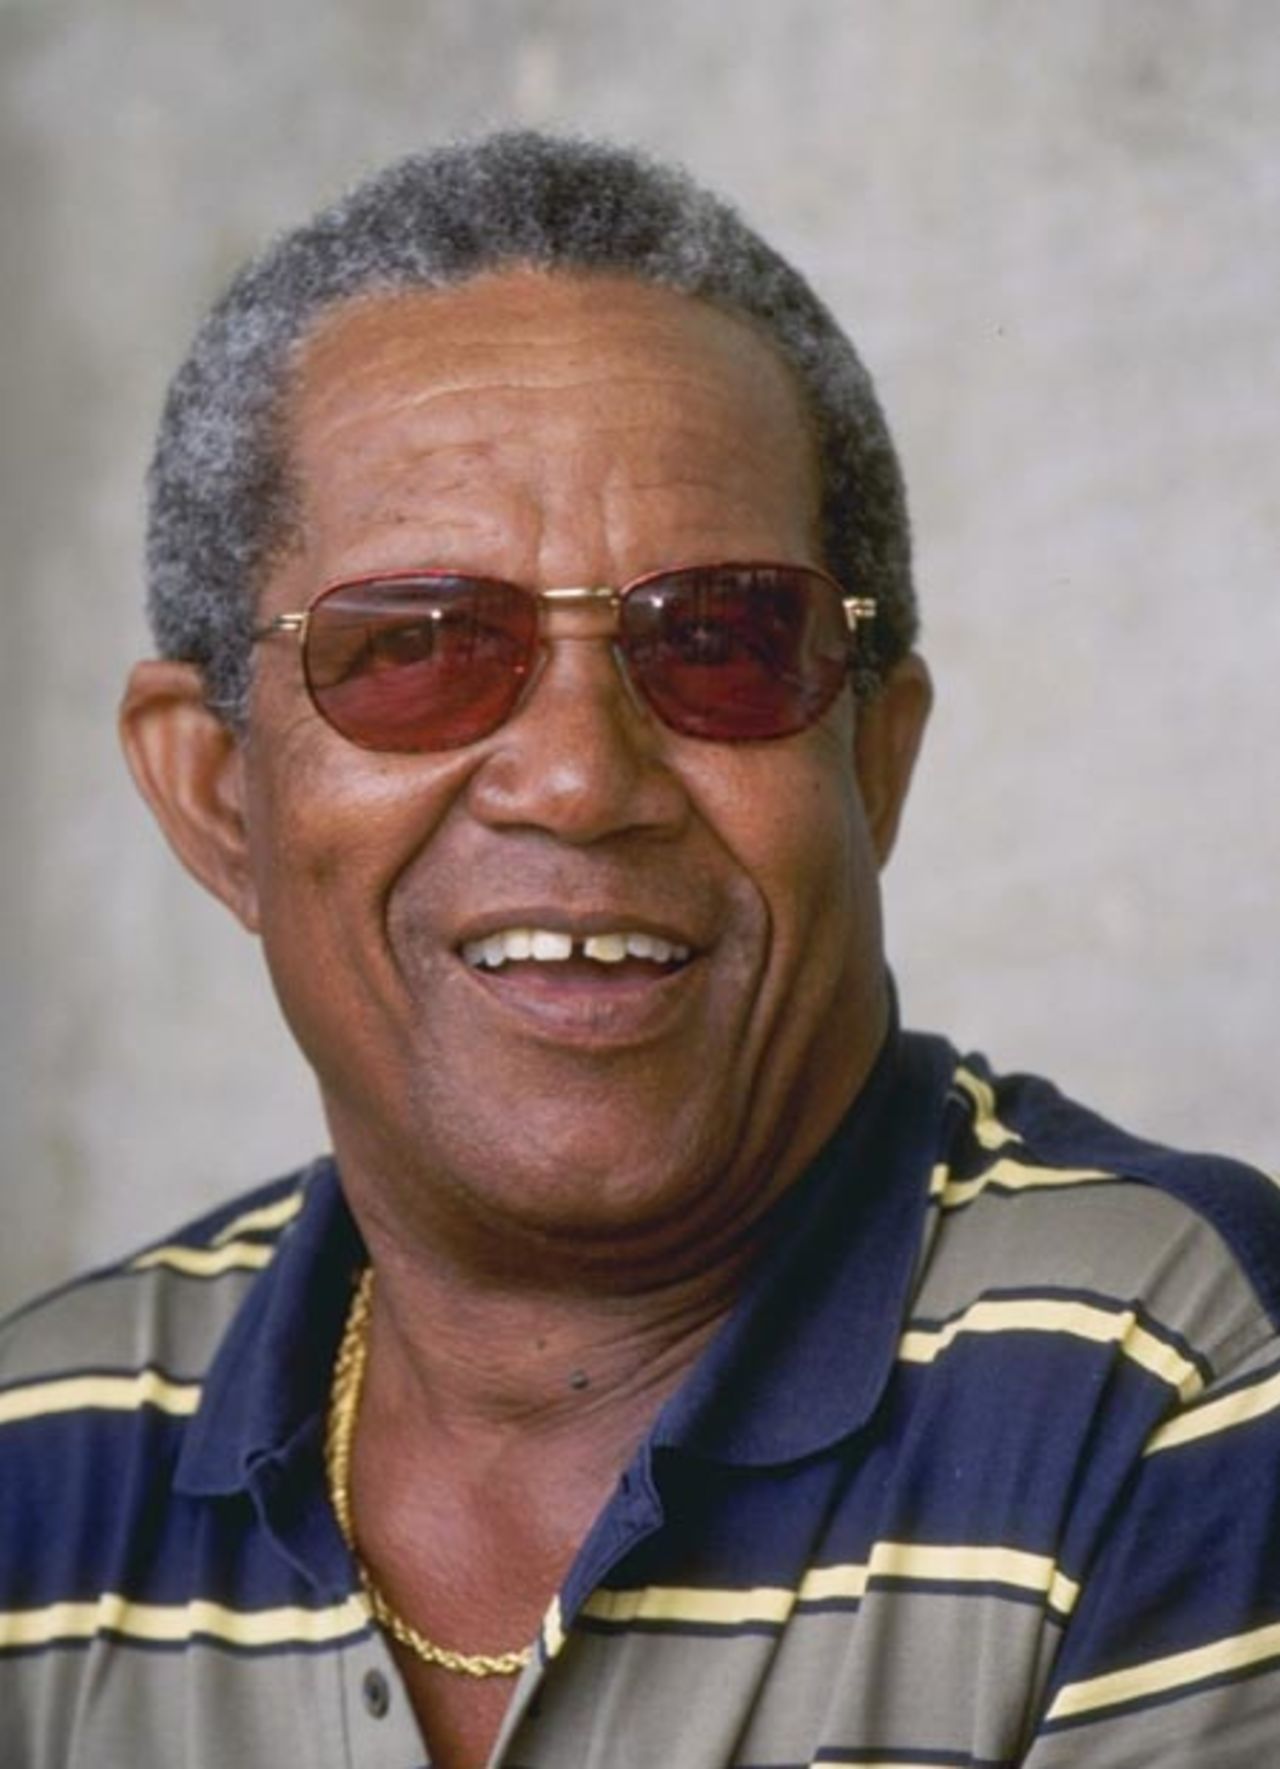 1995: A portrait of Gary Sobers of the West Indies taken during the Australia's tour of the West Indies.